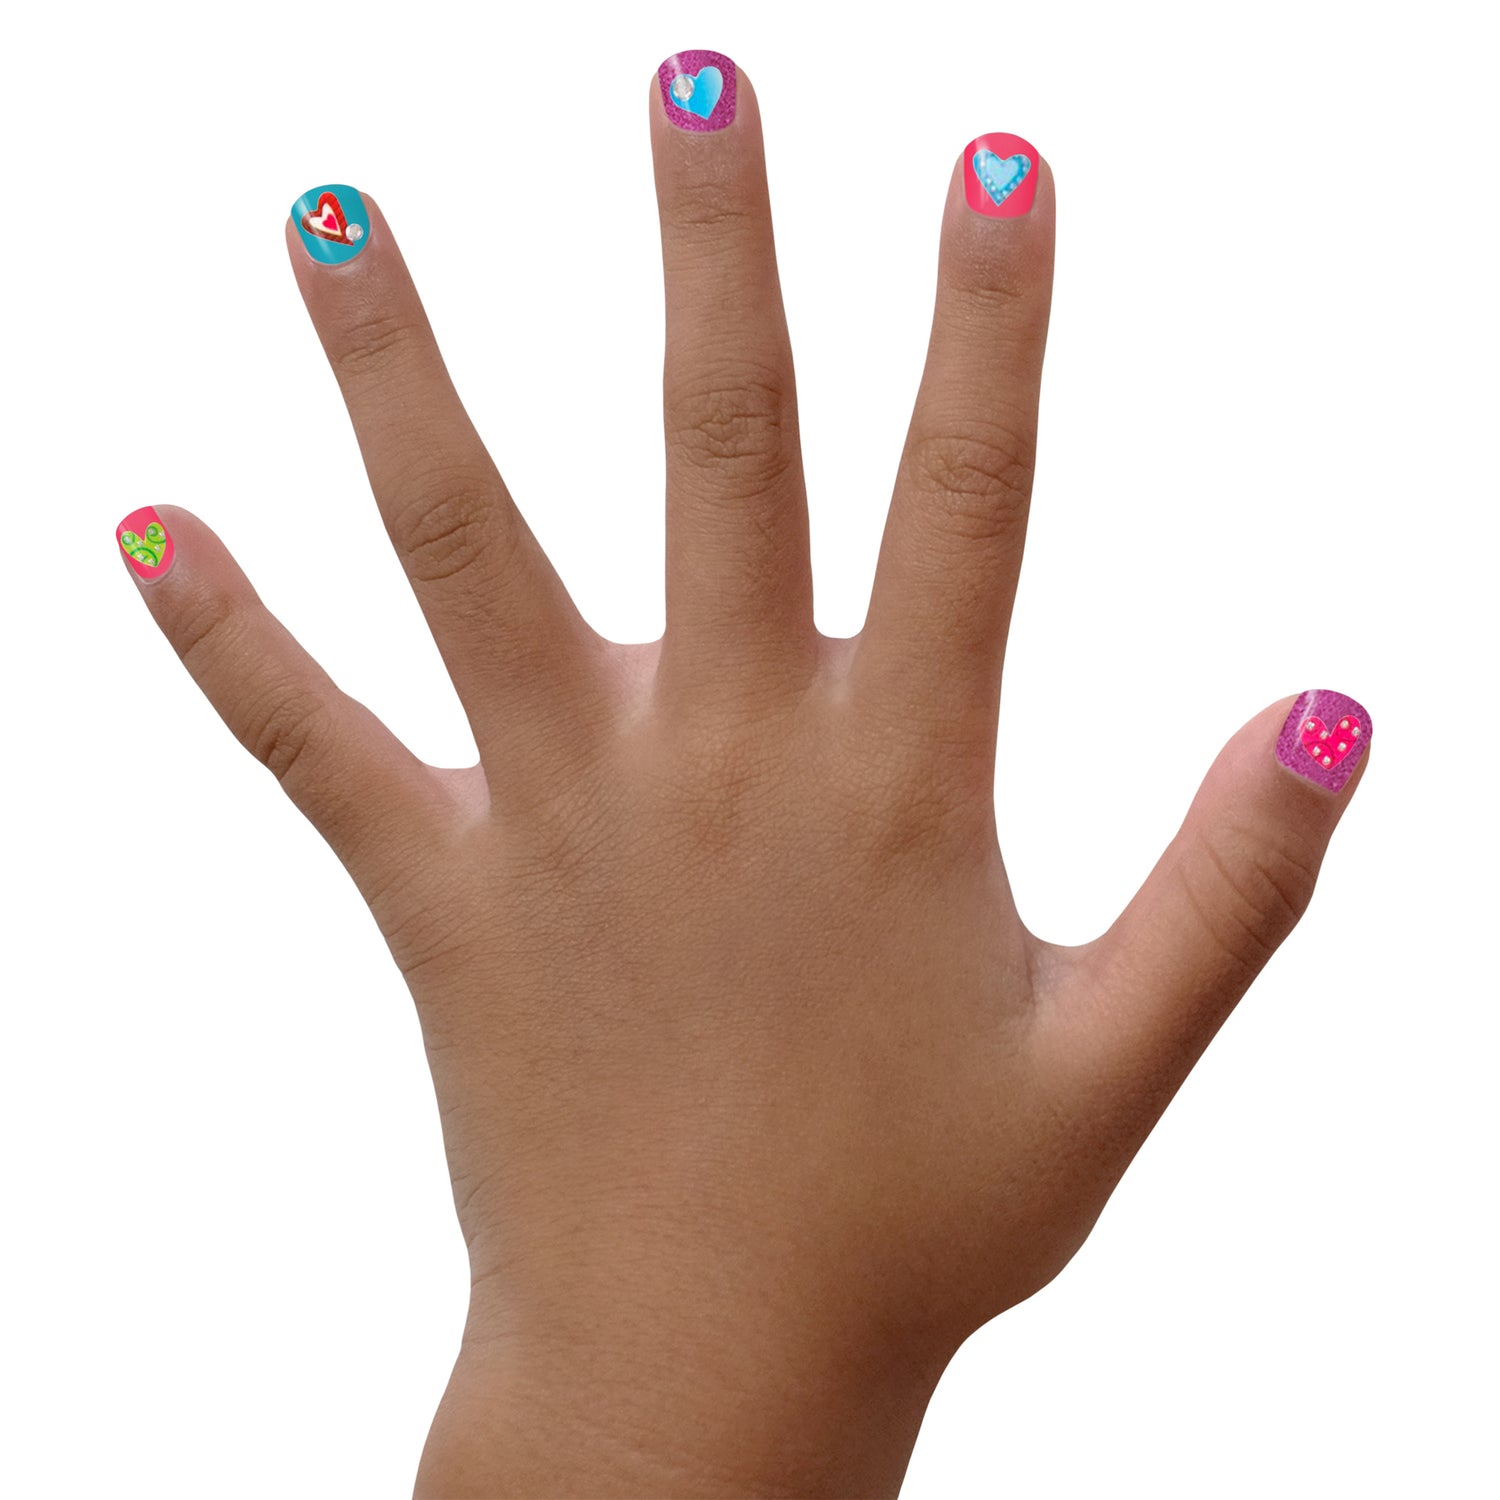 ROCK YOUR SUMMER WITH 3D MANICURE